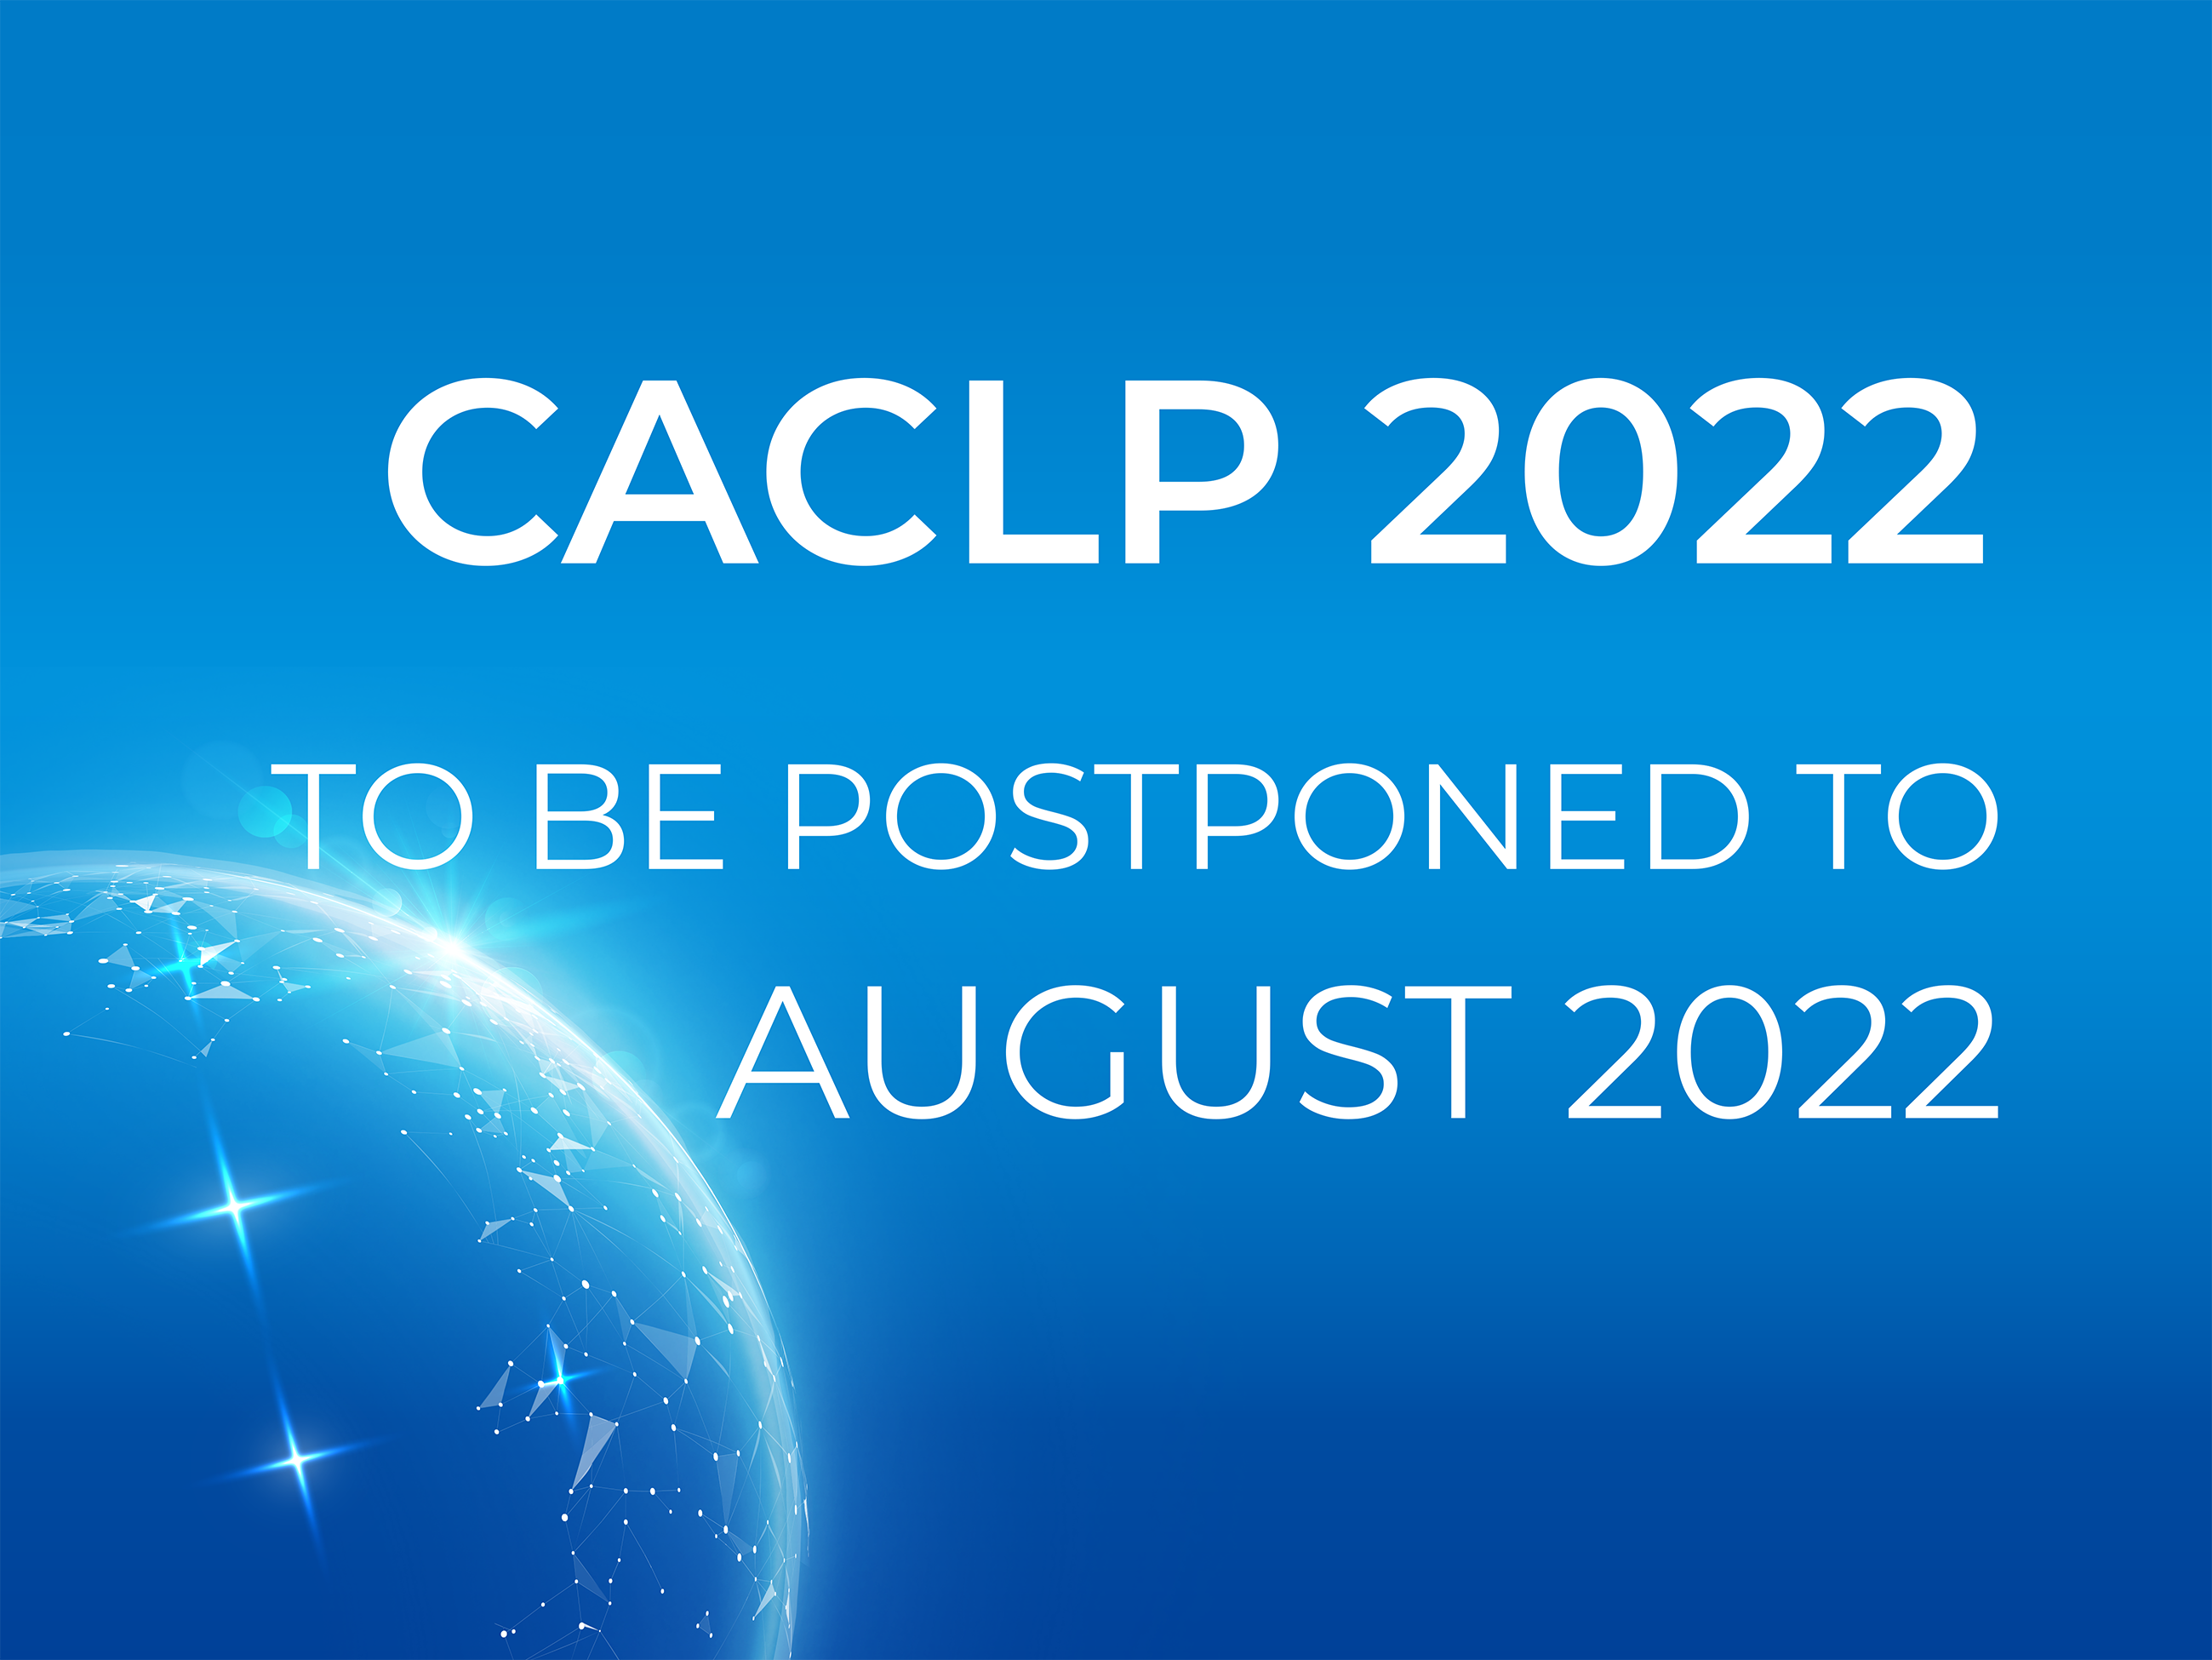 CACLP 2022 TO BE POSTPONED AGAIN TO AUGUST 2022